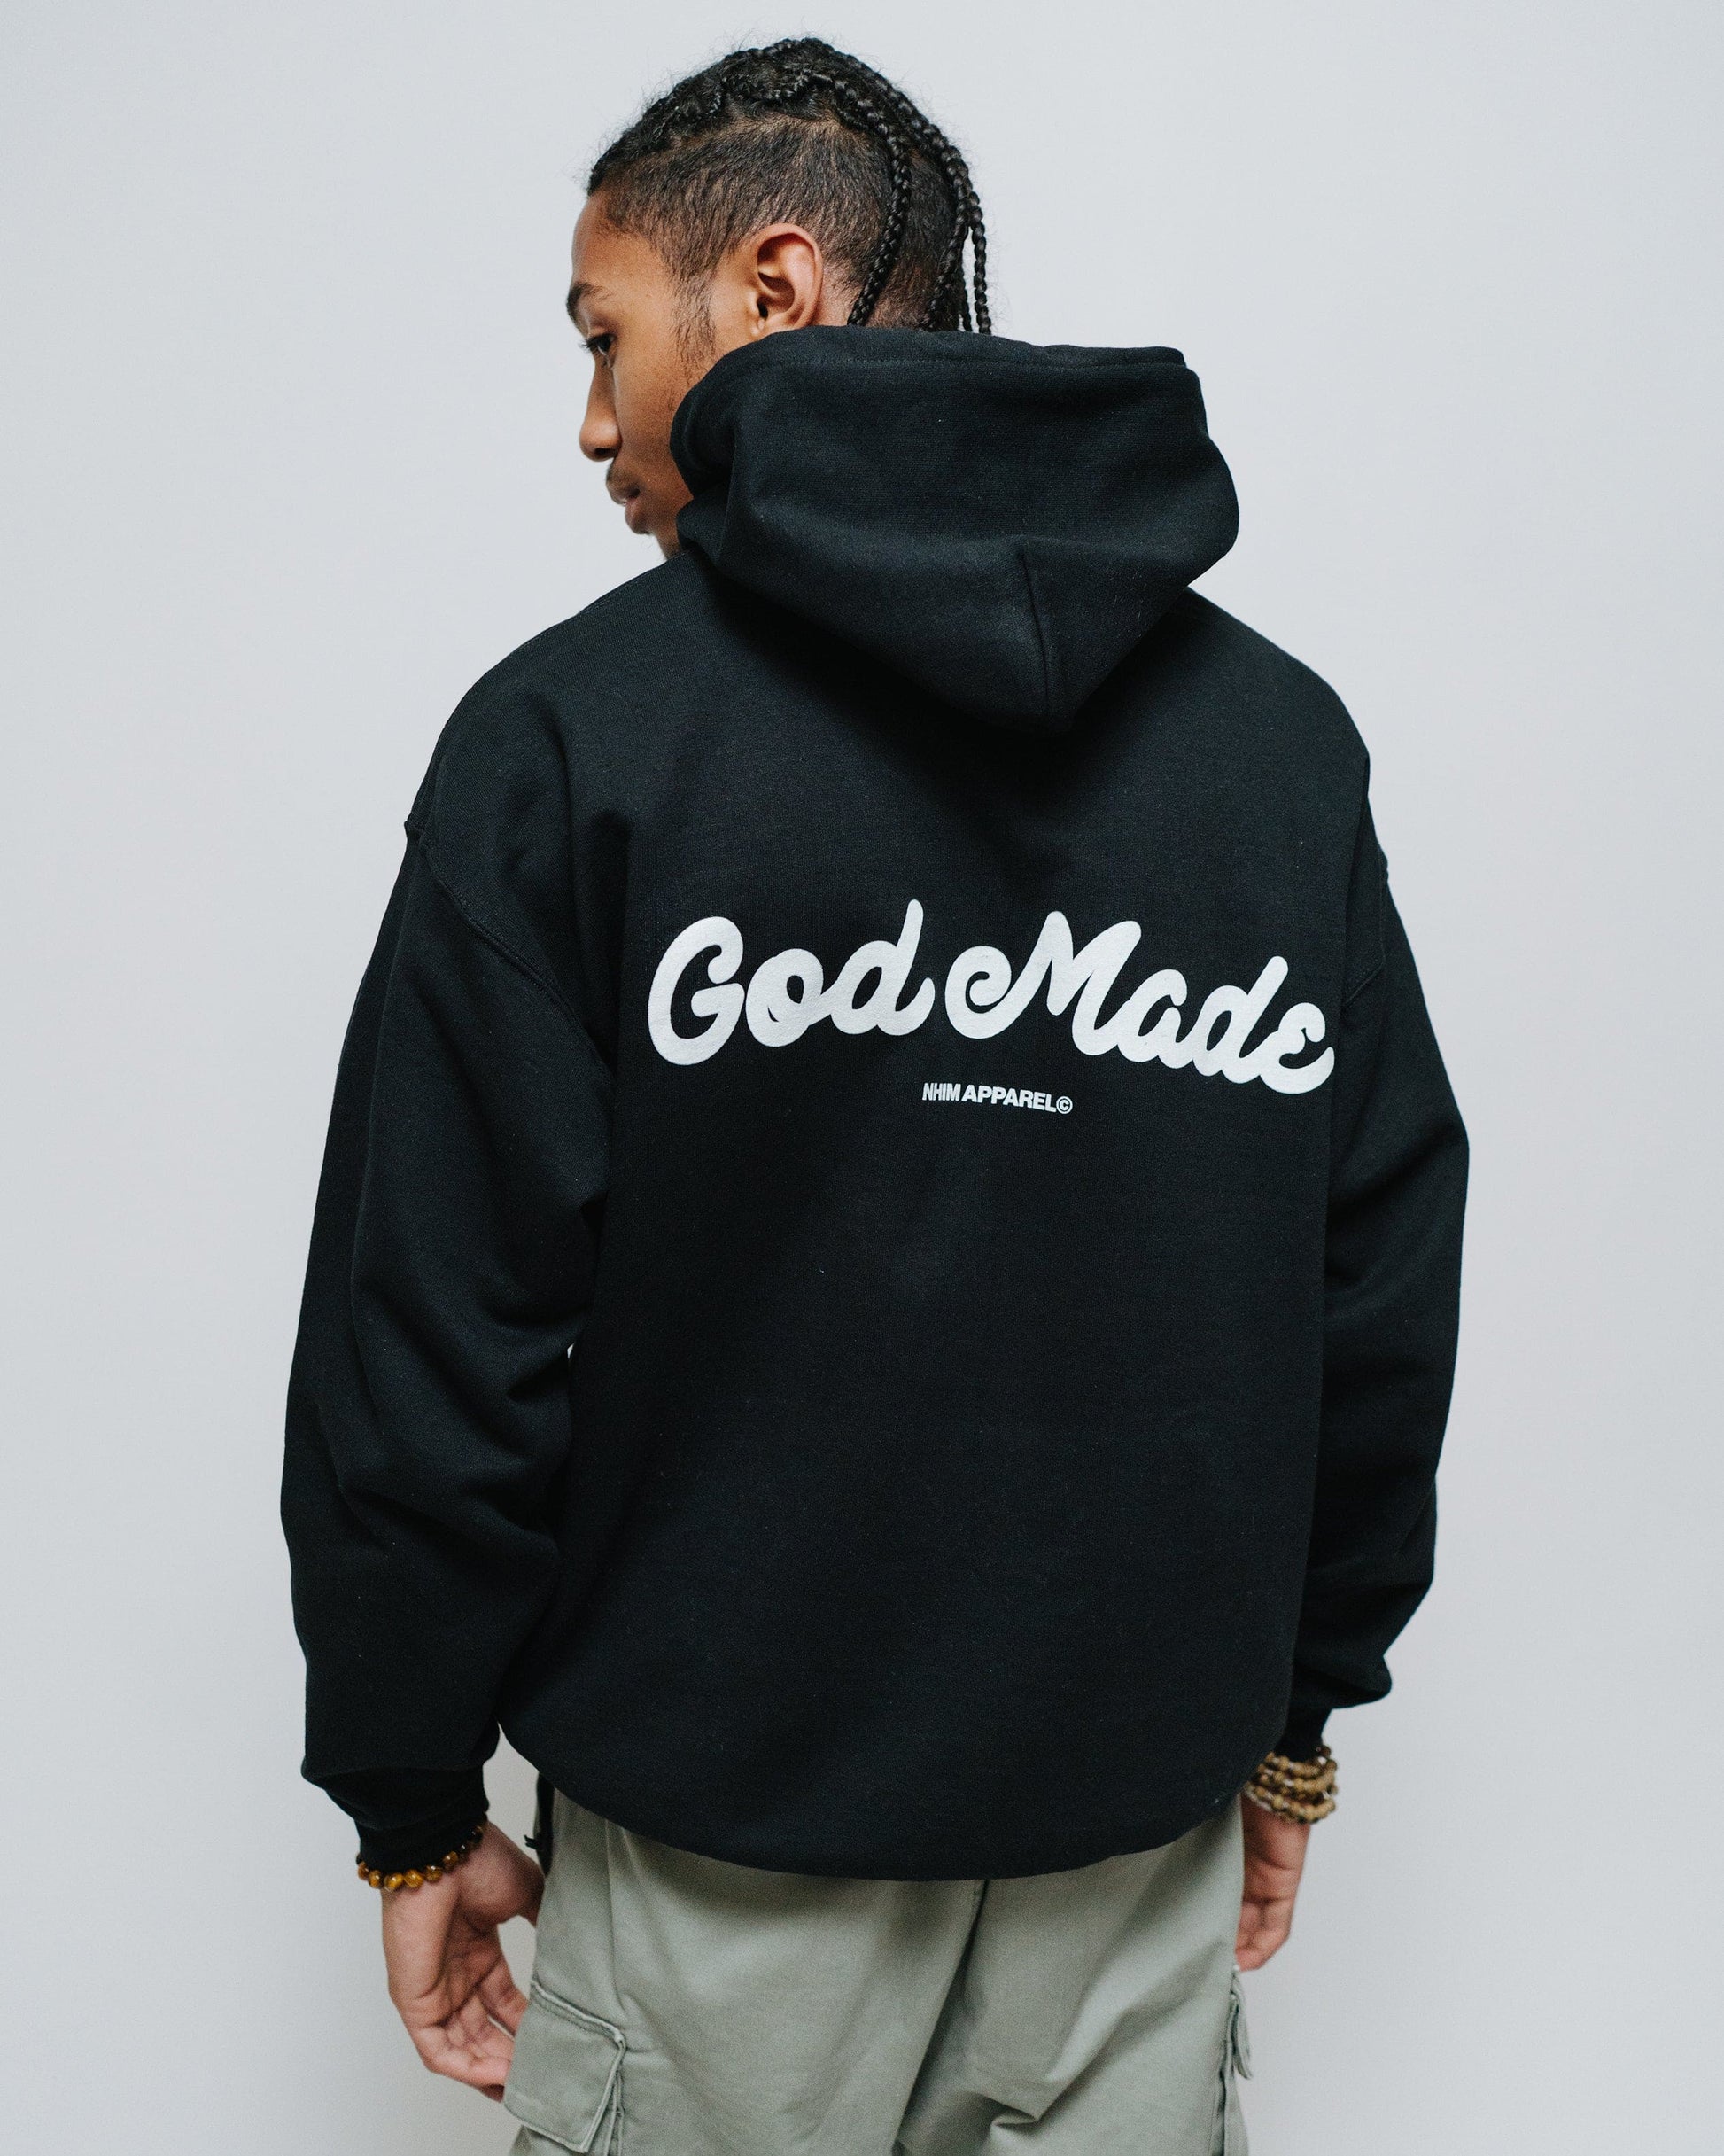 GOD MADE hoodie in black by NHIM Apparel Christian clothing brand